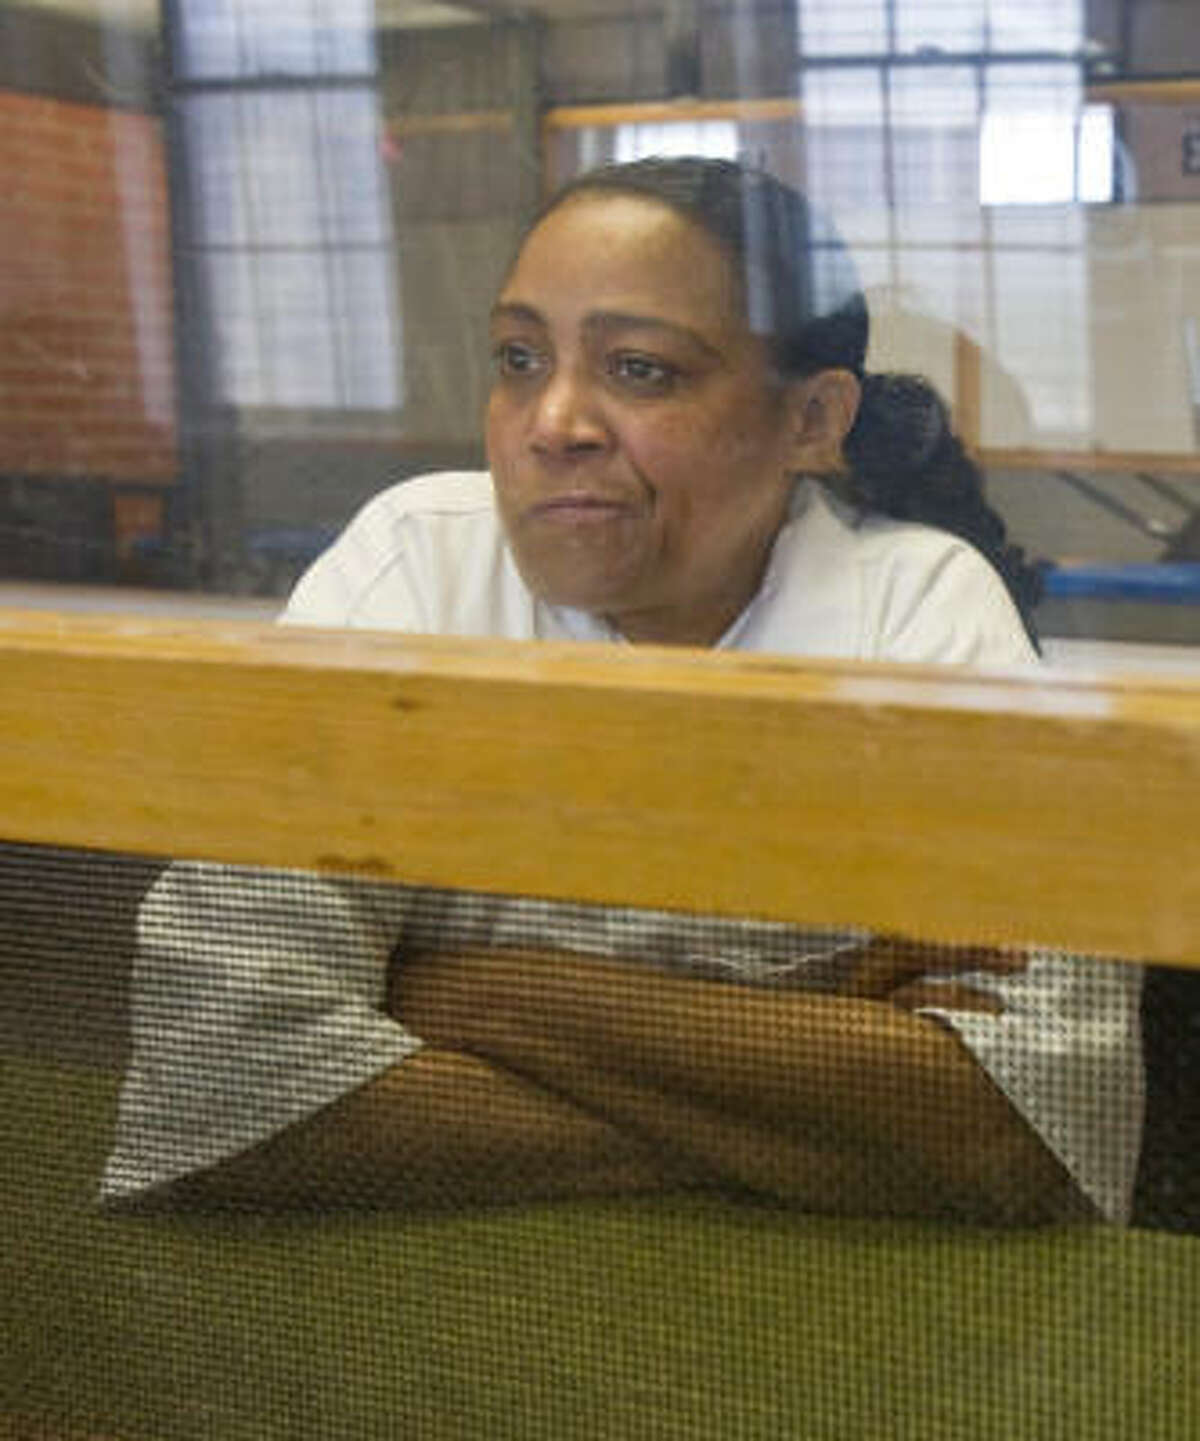 Texas' most controversial executions Name: Linda Carty Crime: On May 16, 2001, Carty and three co-defendants invaded the home of a 25-year-old female. The victim and her 3-day-old baby were kidnapped and two other victims were beaten, duct taped, and left in the residence. The 25-year-old female was hog-tied with duct tape, a bag was taped over her head, and she was placed in the trunk of a car. This victim died from suffocation. Execution: Currently on Death Row Controversy: Her latest appeal for a new hearing includes an affidavit from a former DEA agent who alleges misconduct from the prosecutor and police. Among other things, this agent says the prosecutor threatened to ruin his career by falsely accusing him of an affair with Carty – his one-time confidential informant – if he didn’t testify in the case against her. 